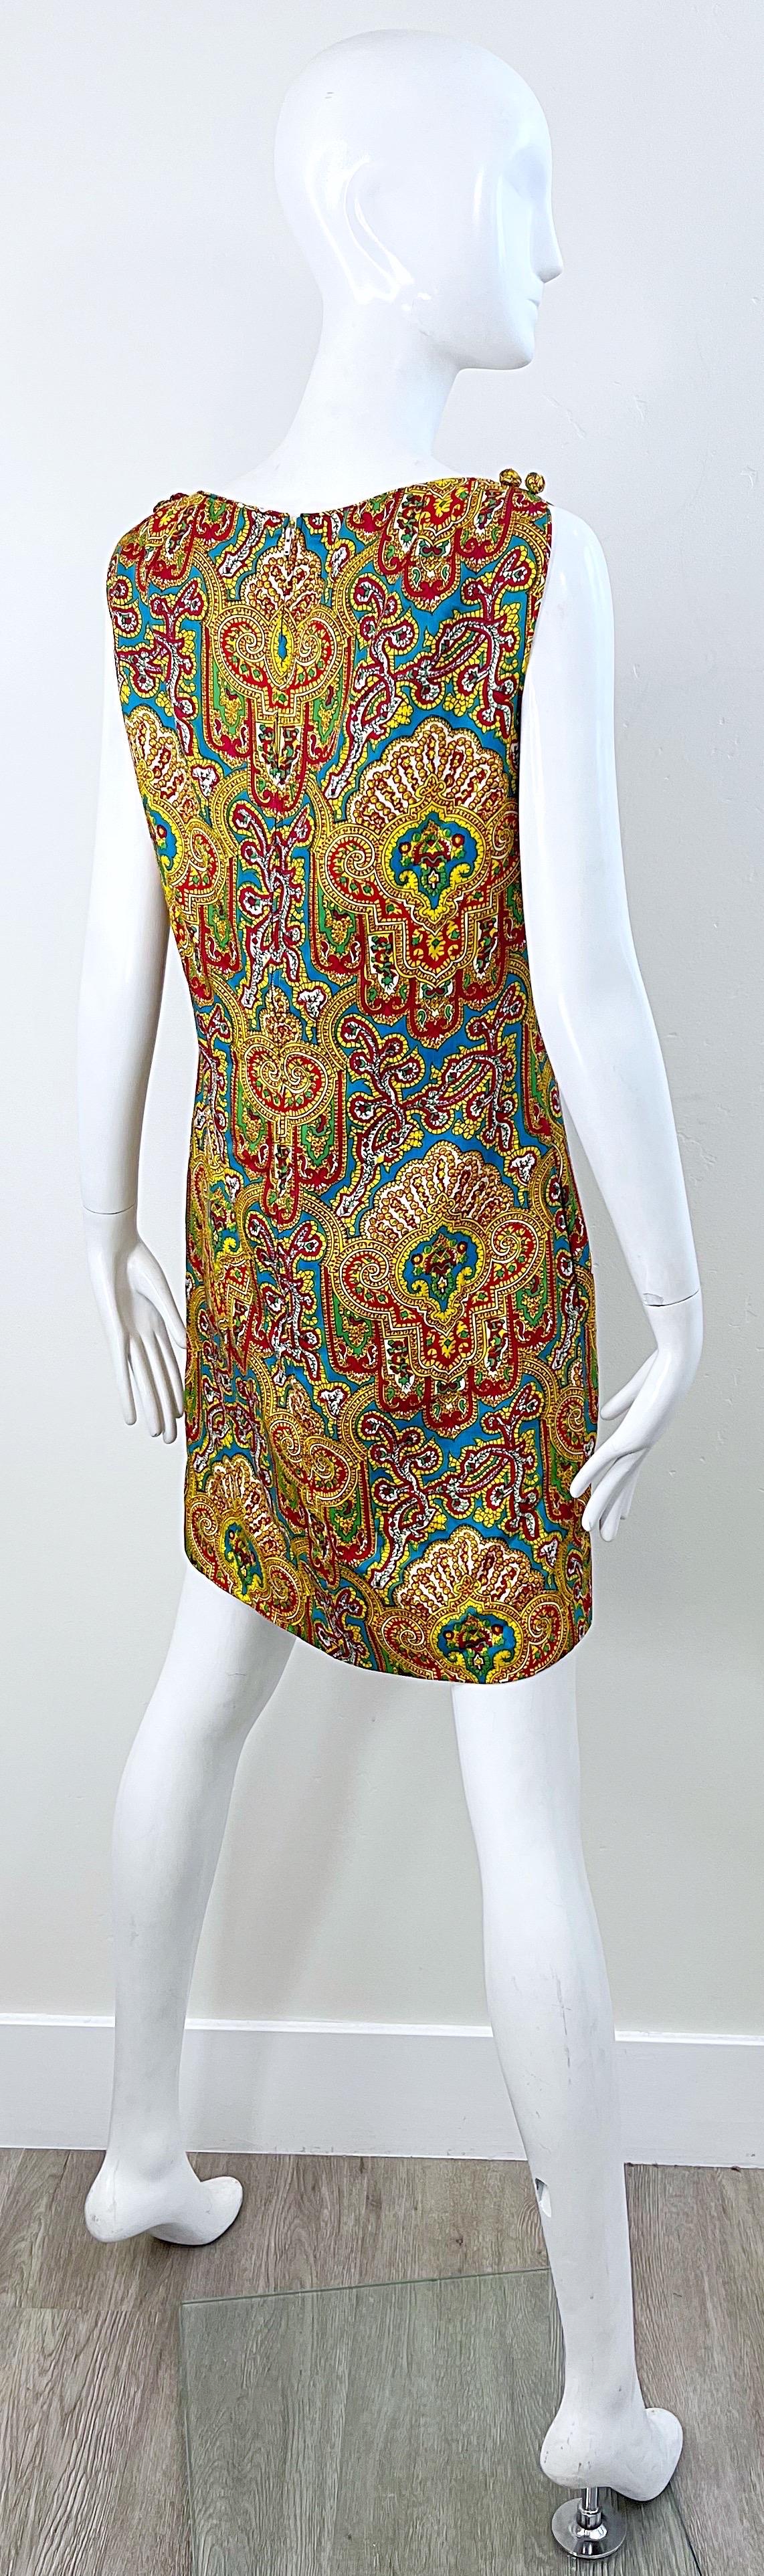 1960s Dynasty Paisley Bright Colorful Silk Vintage 60s Sleeveless Shift Dress For Sale 2